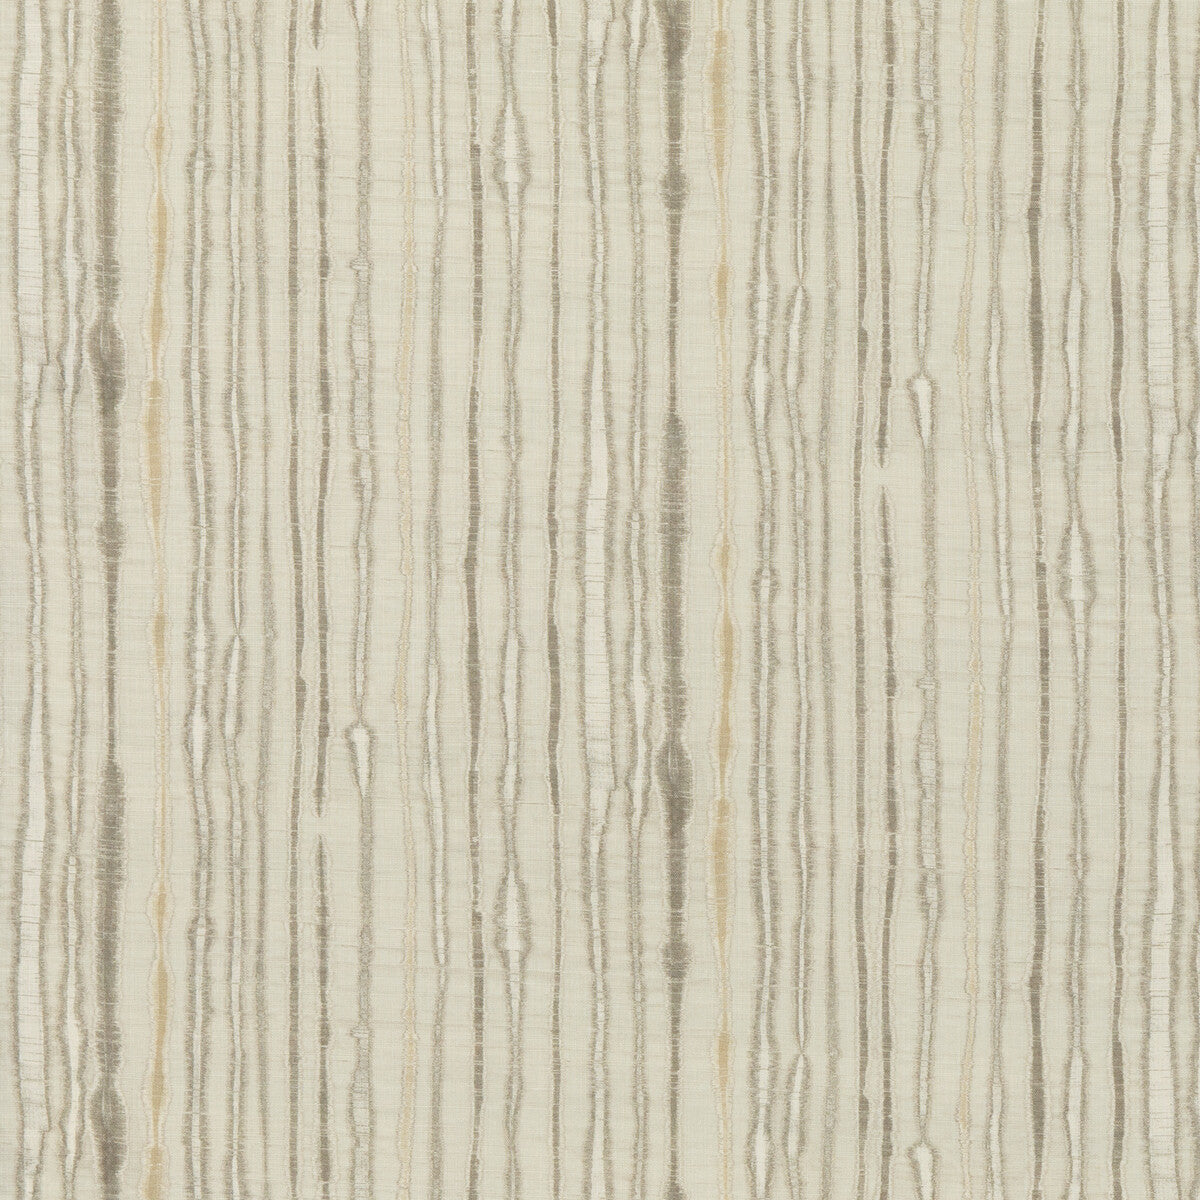 Linear fabric in ivory color - pattern ED75038.3.0 - by Threads in the Nala Prints collection